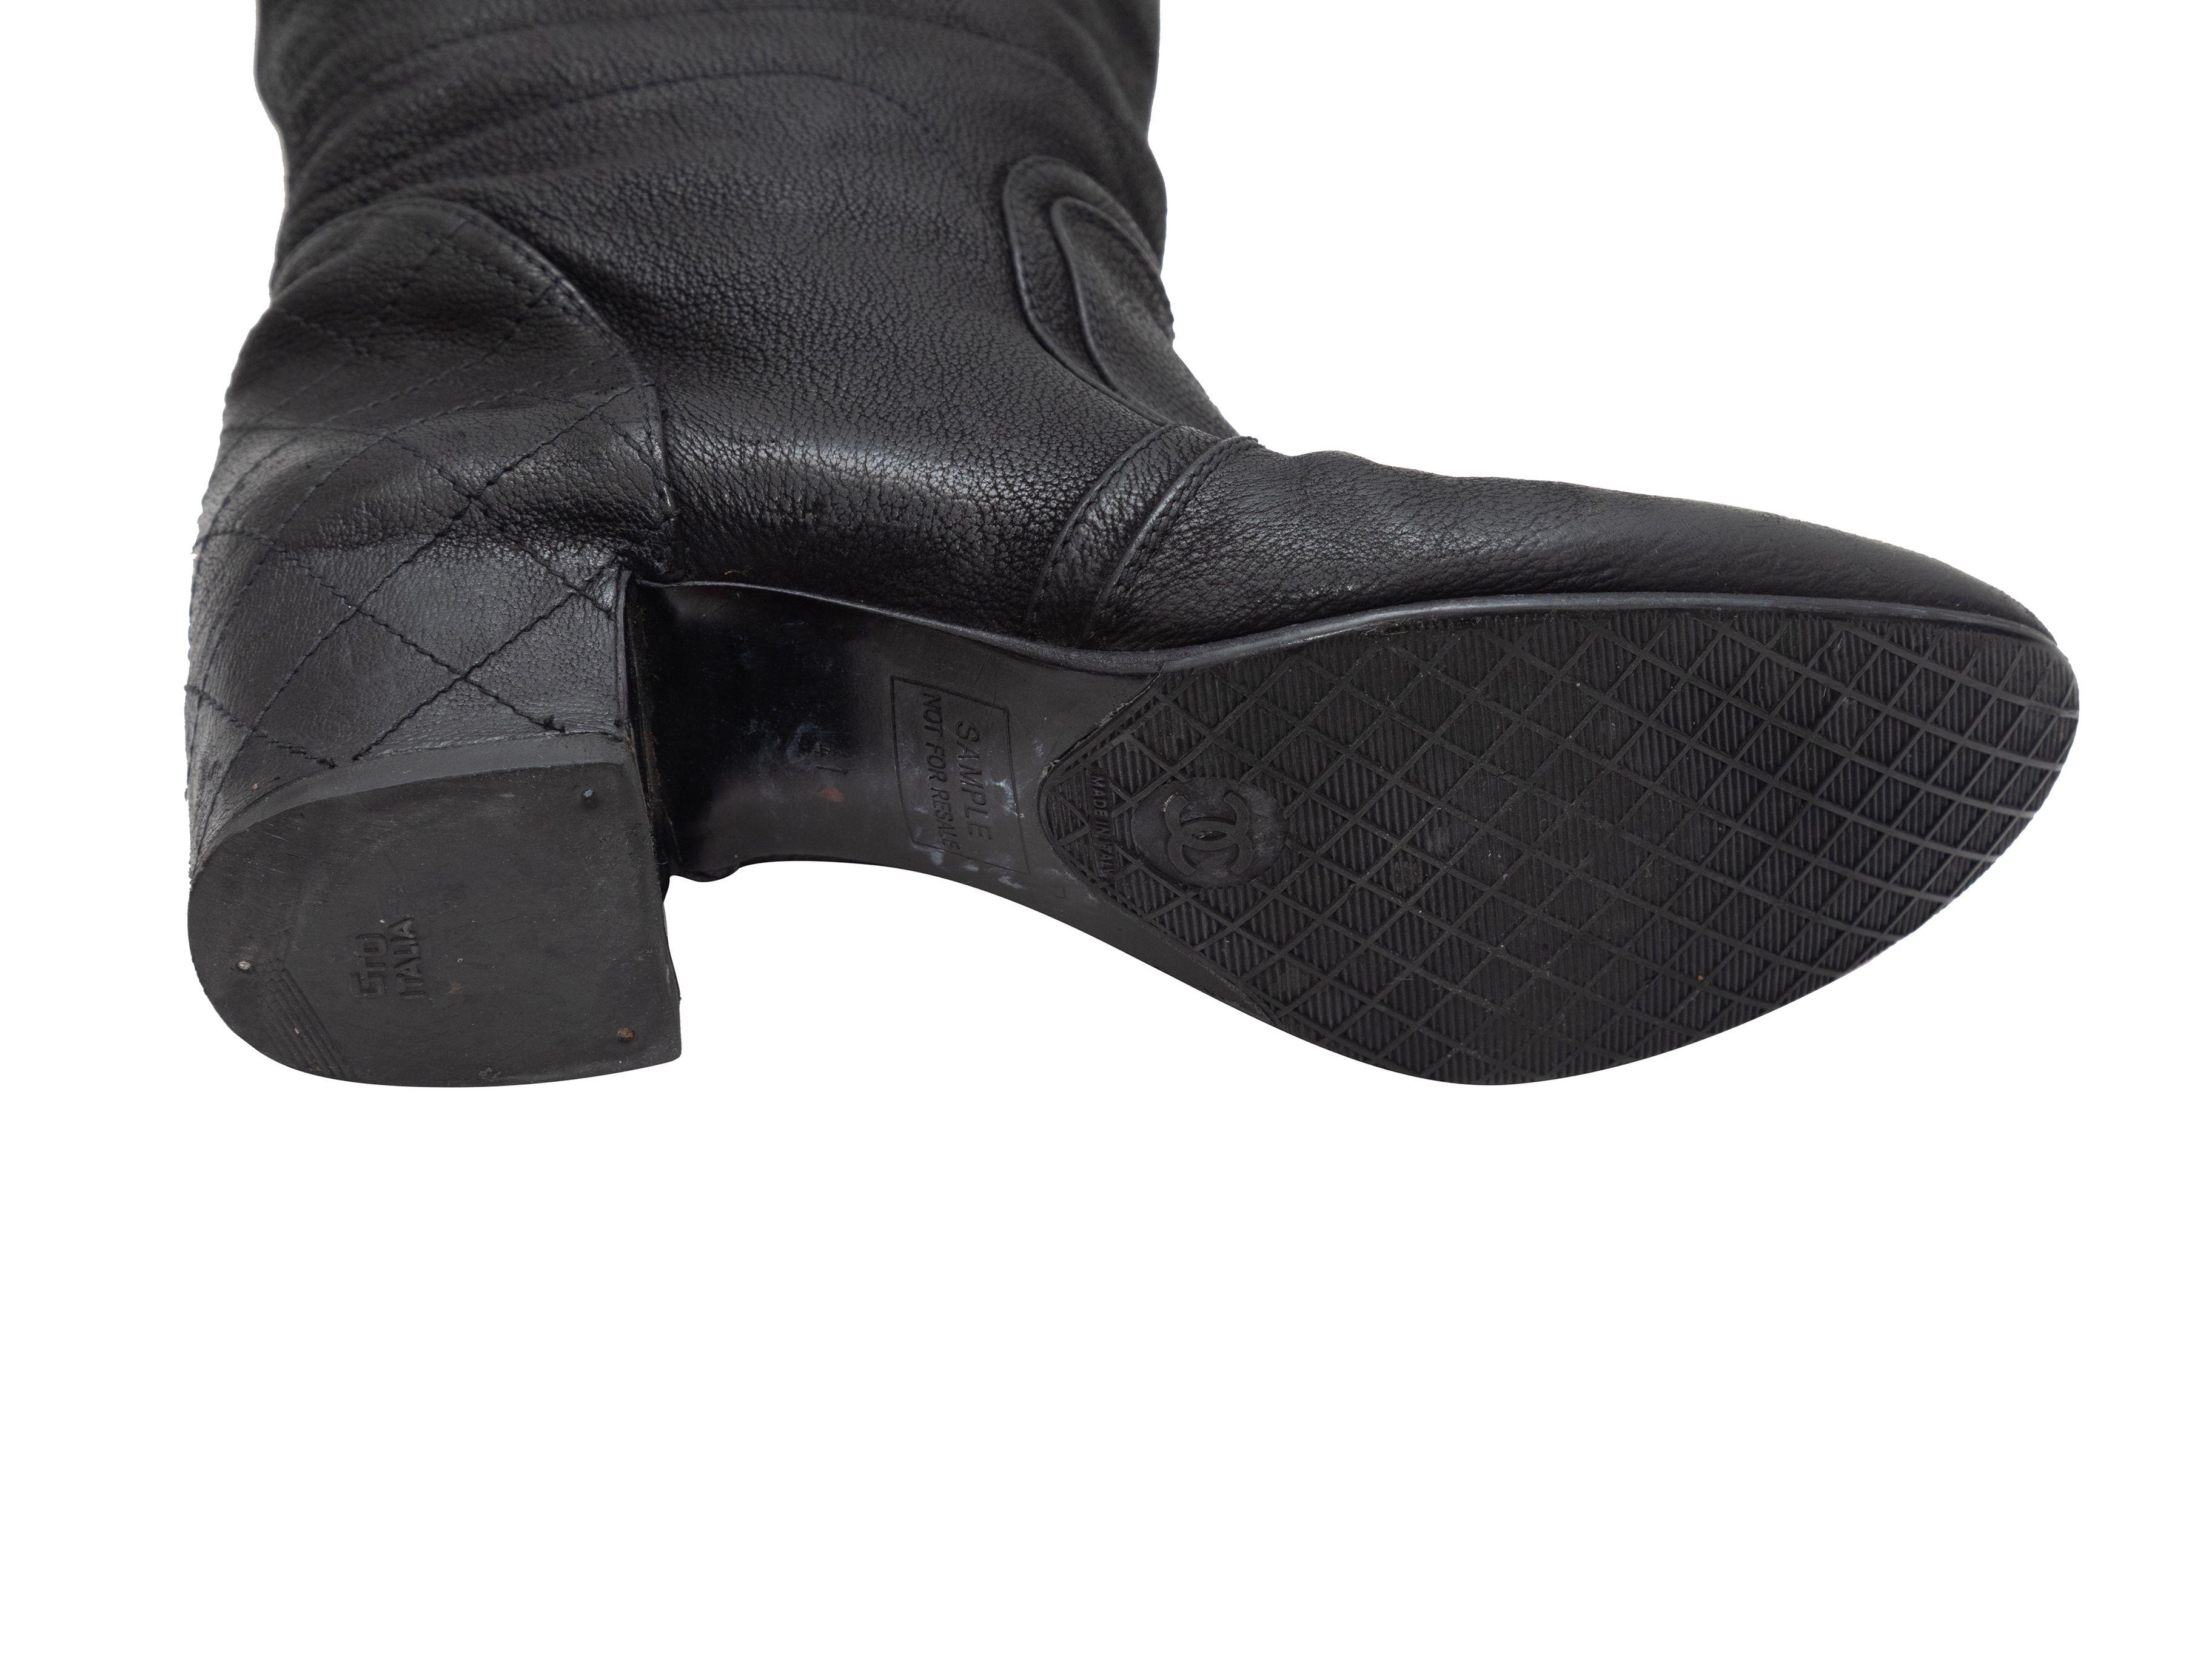 Product Details: Black leather knee-high boots by Chanel. Block heels. Zip closures at counters. 1.75